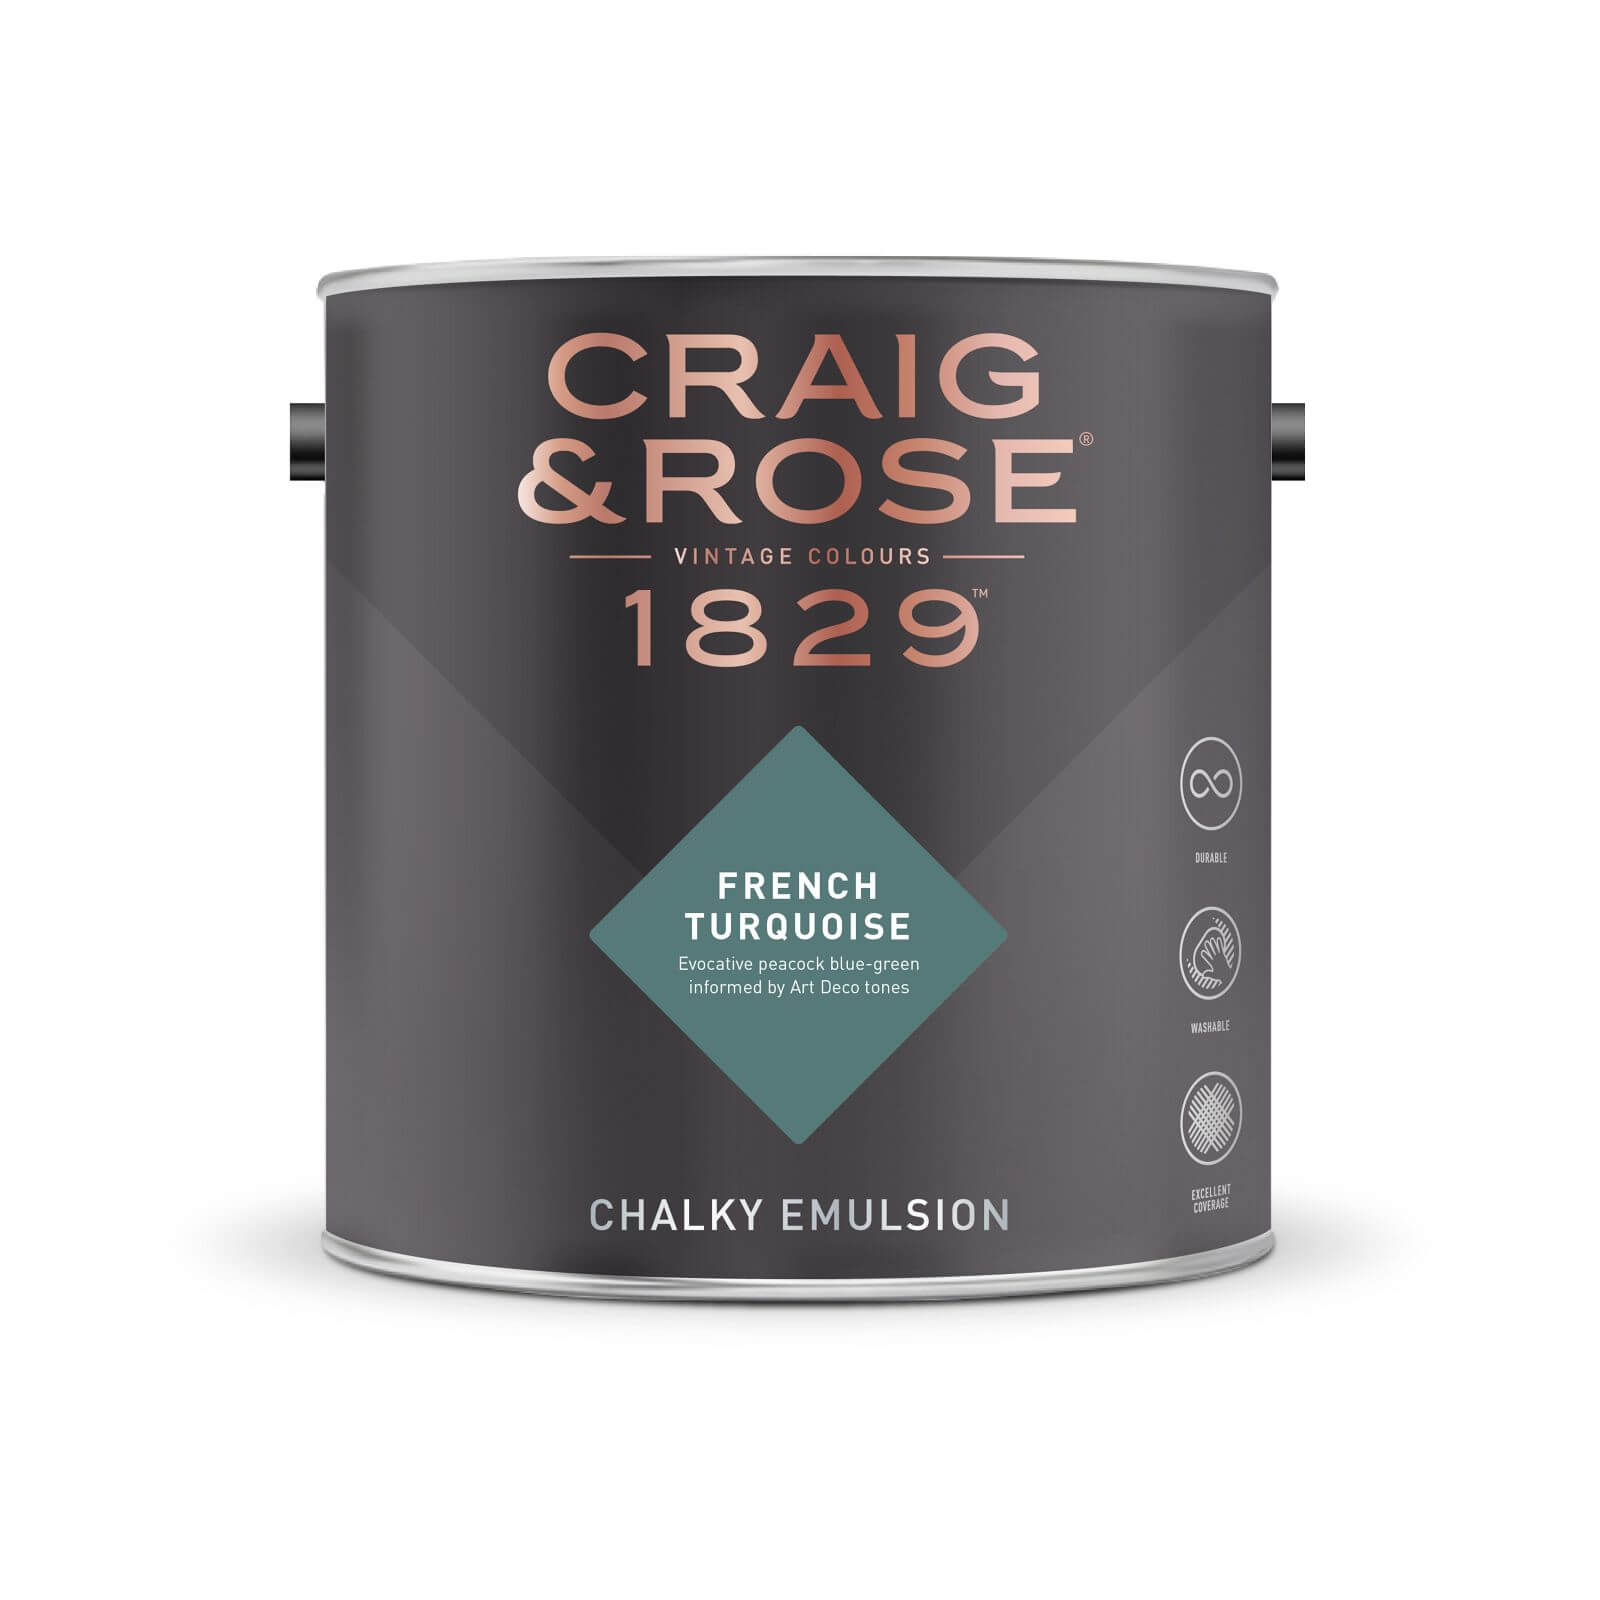 Craig & Rose 1829 Chalky Emulsion Paint French Turquoise - Tester 50ml